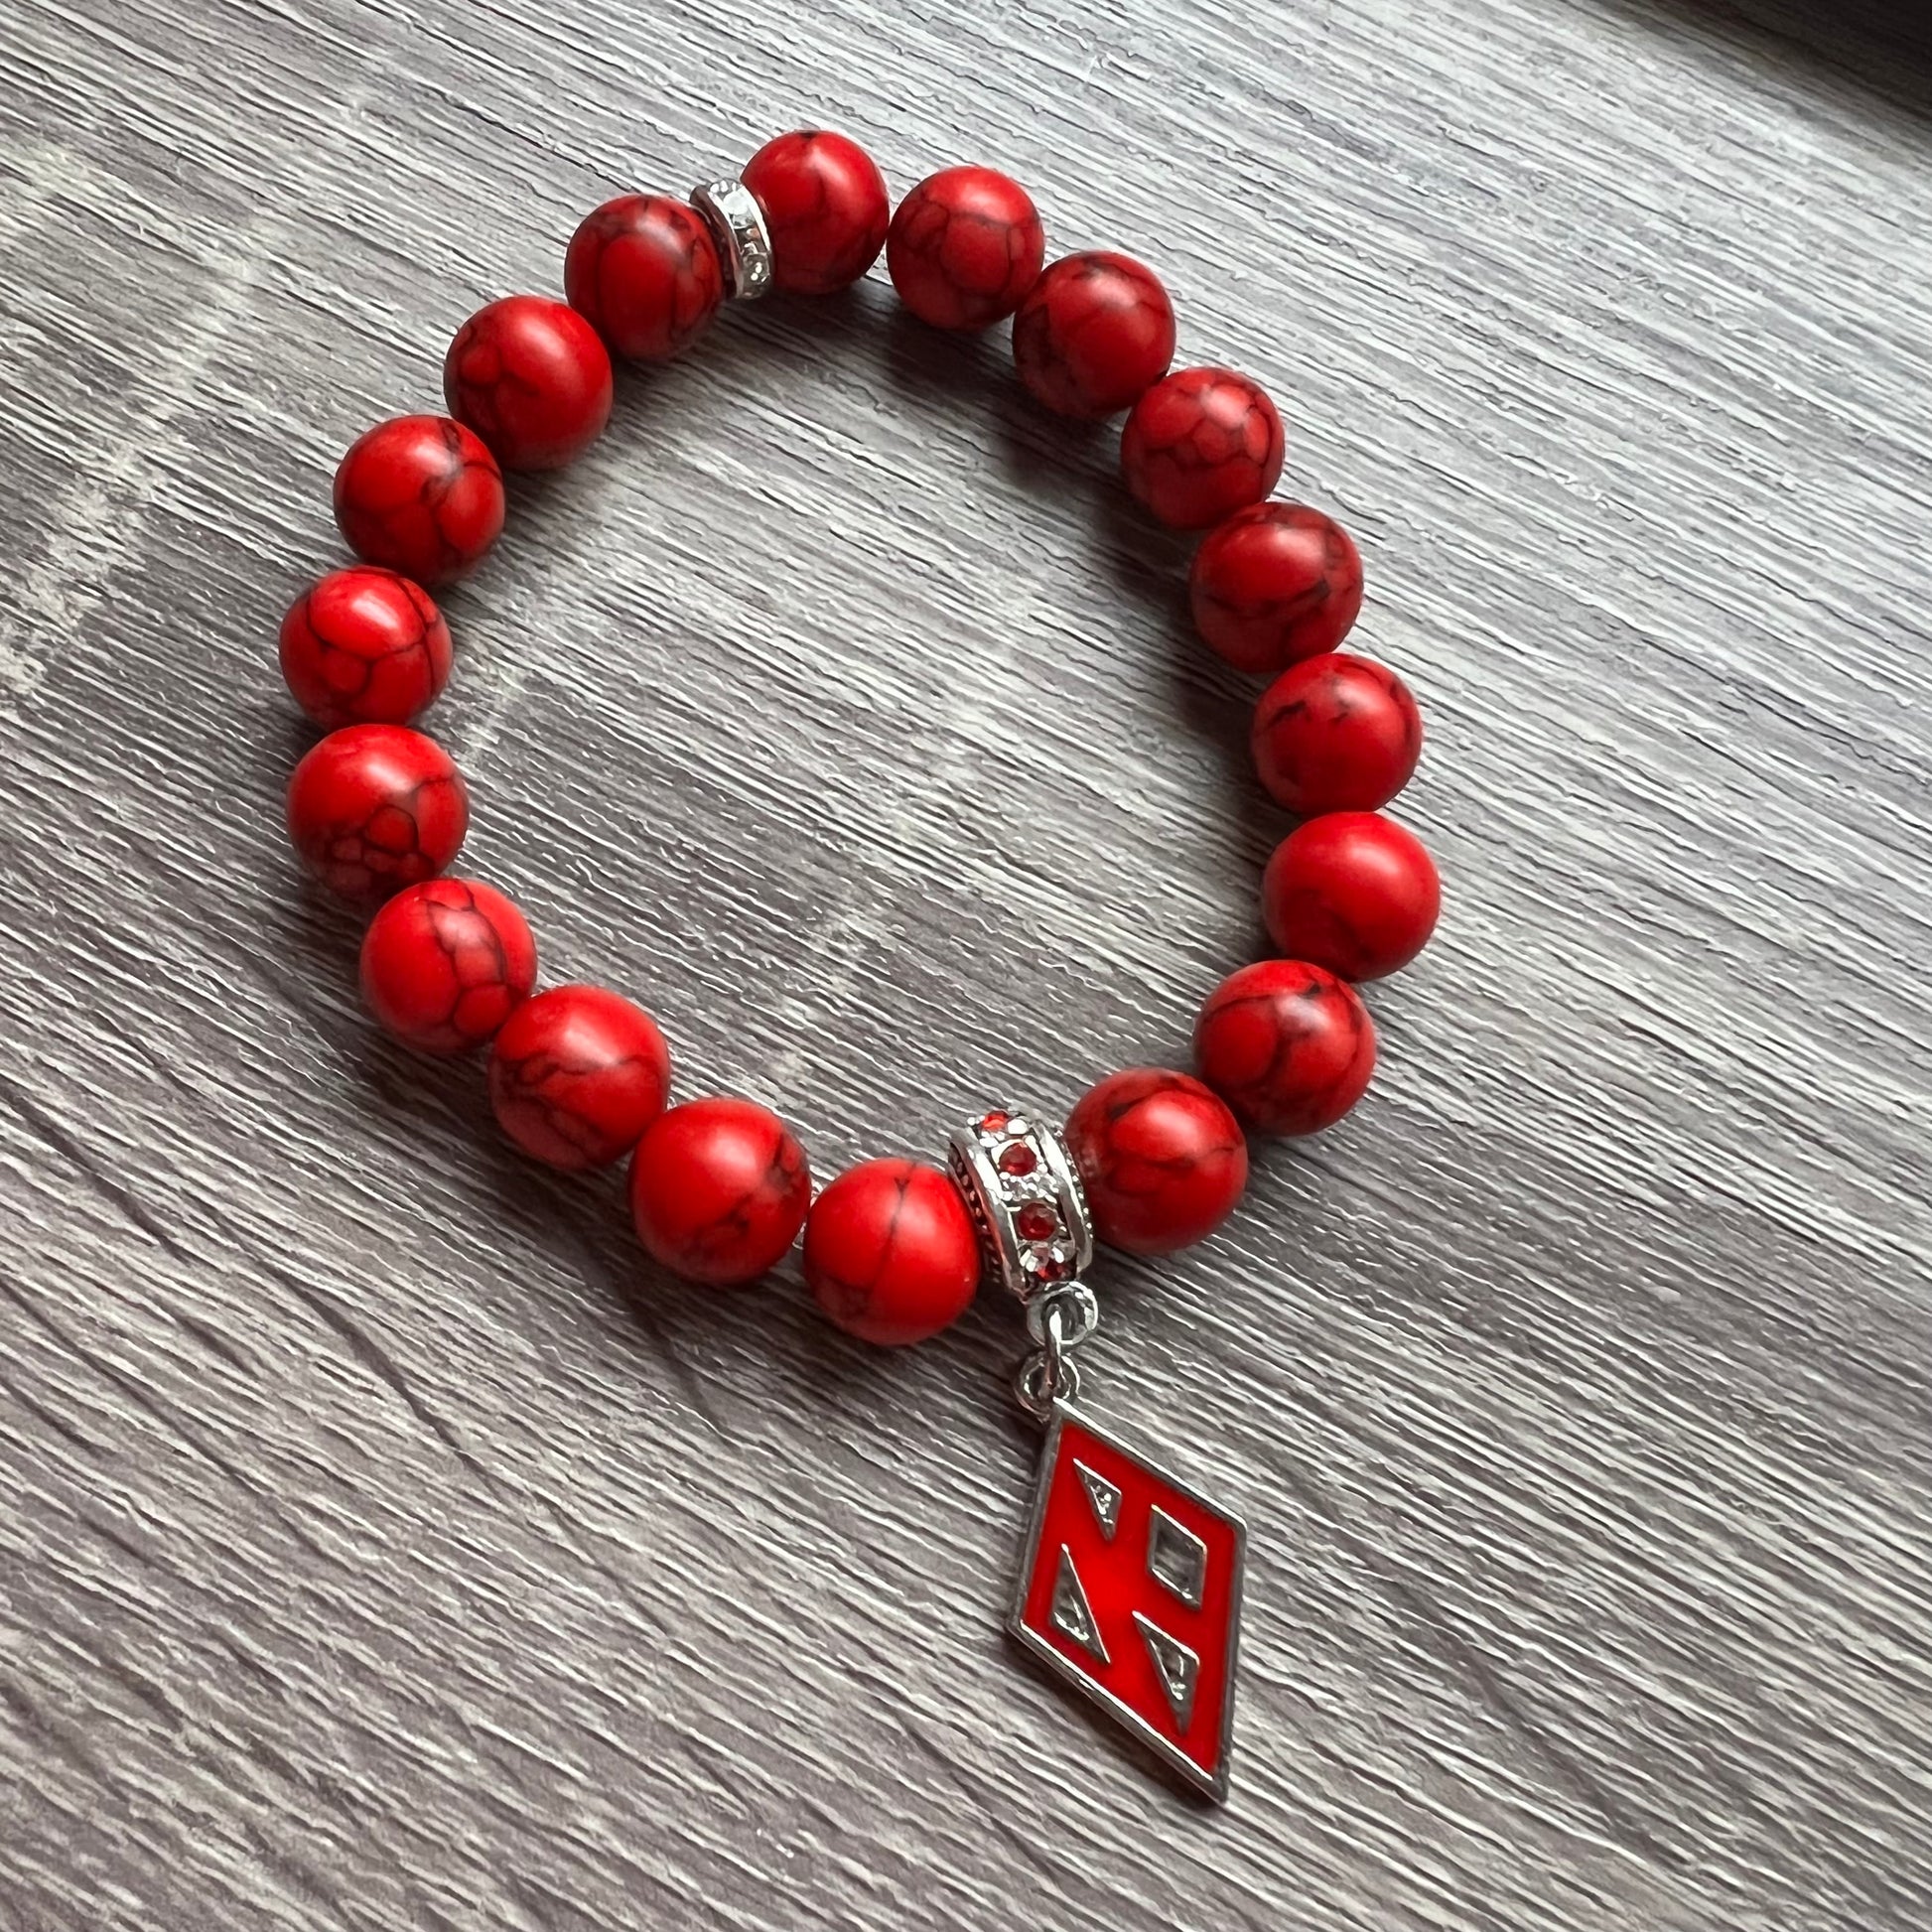 Kappa Alpha Psi fraternity exclusive Glass Beaded Bracelet on elastic stretch rope; simple and elegant. Easy bracelet to slide on and off wrist. The color of amber beads may vary from bracelet to bracelet due to each bracelet being hand made from natural materials with a personal touch.